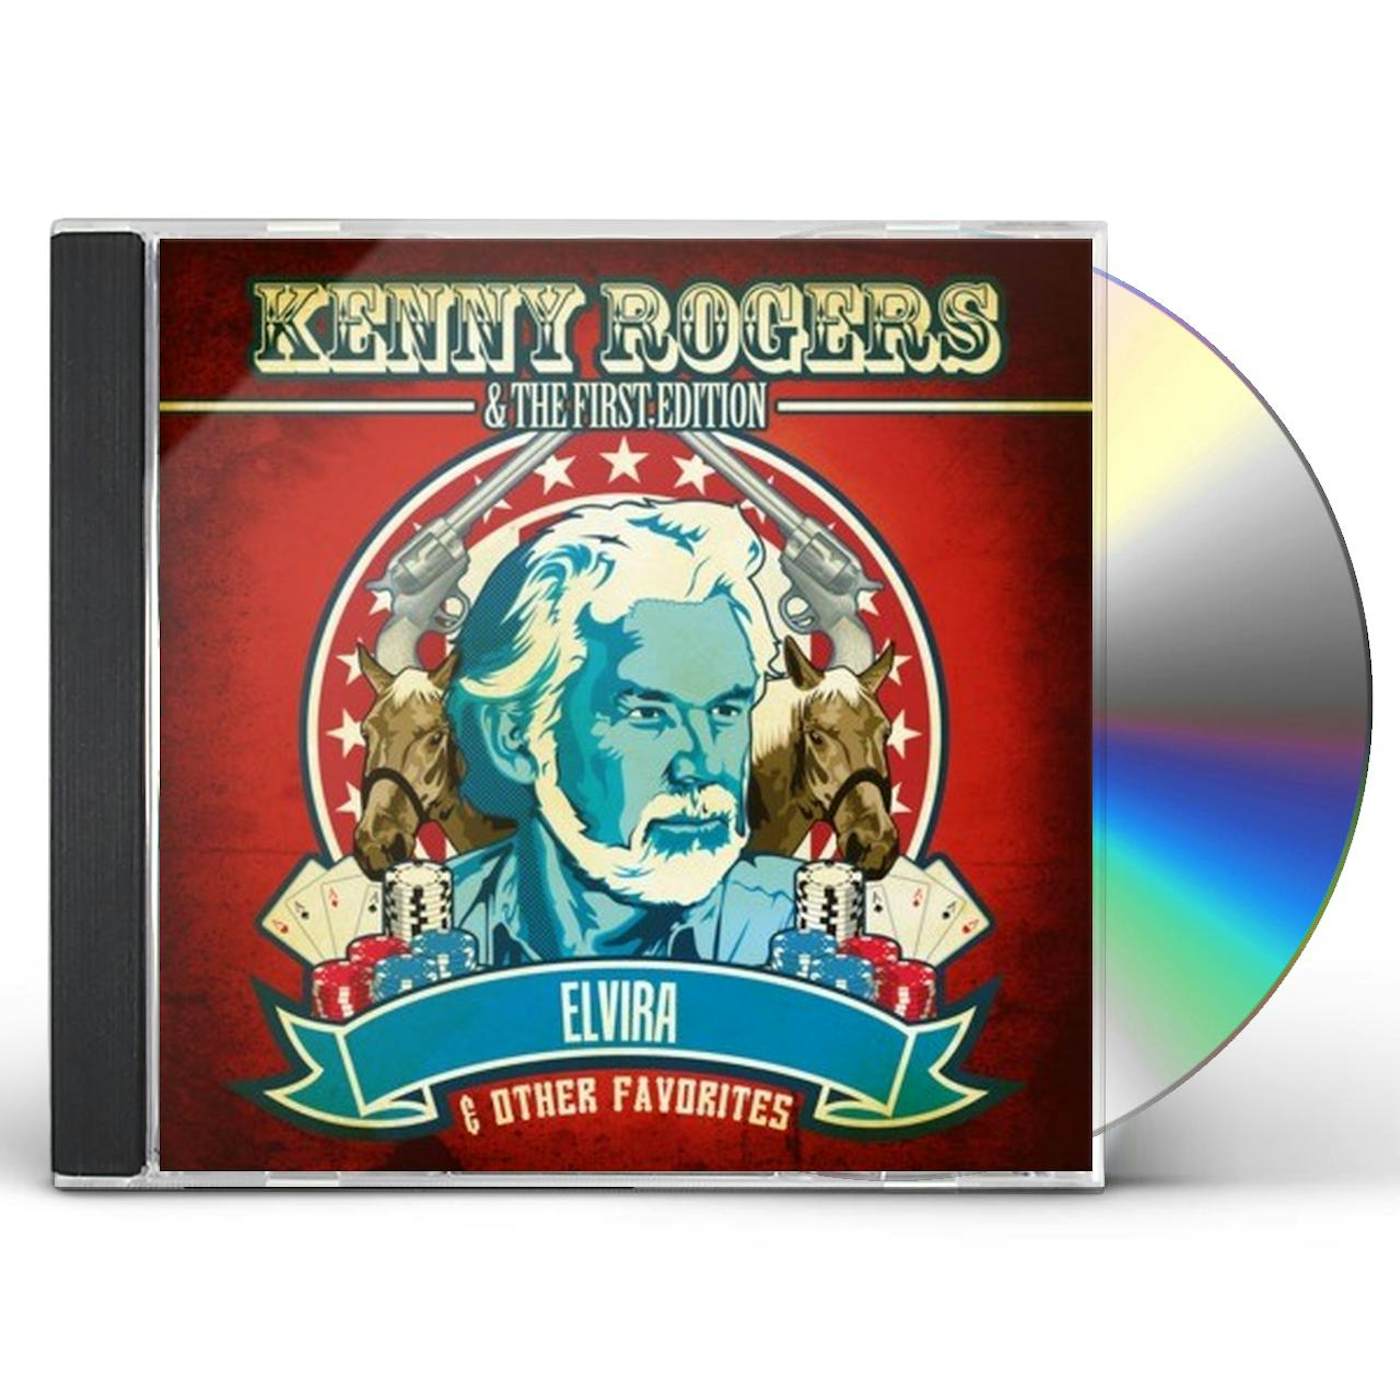 Kenny Rogers & The First Edition ELVIRA & OTHER FAVORITES CD